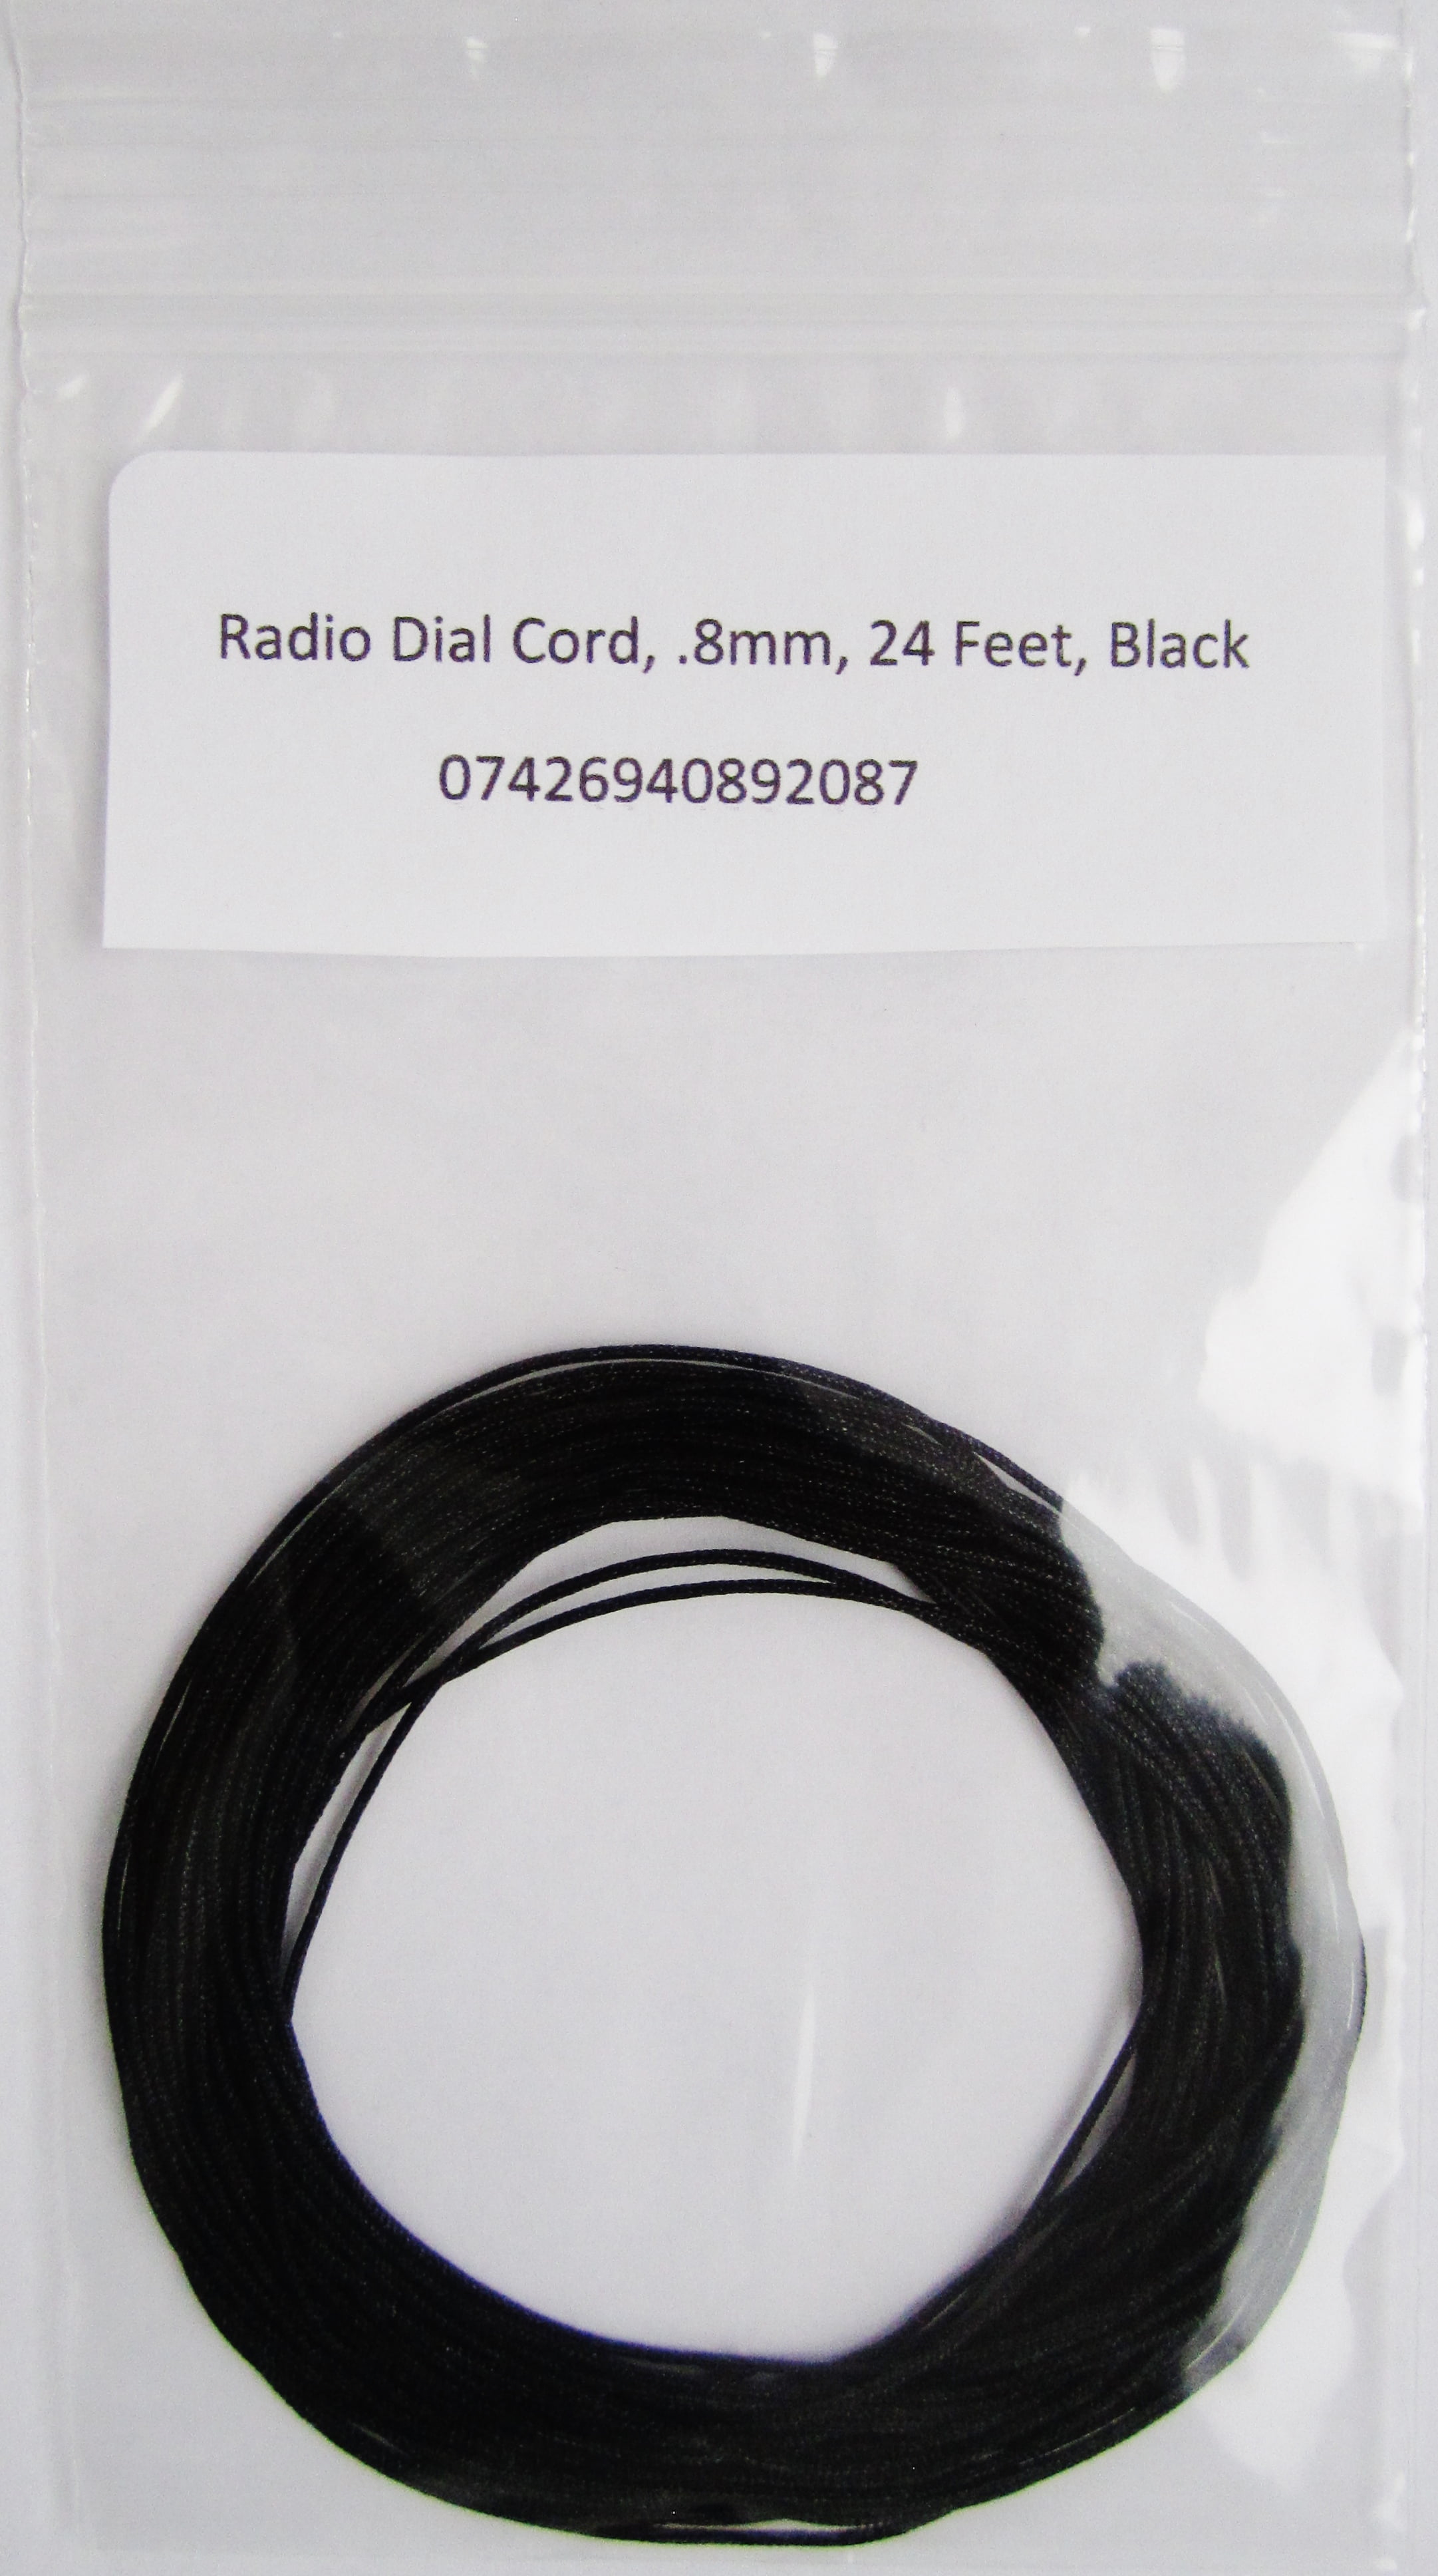 DIAL CORD 1.0 mm synthetic cord 10 metres to suit radios. 